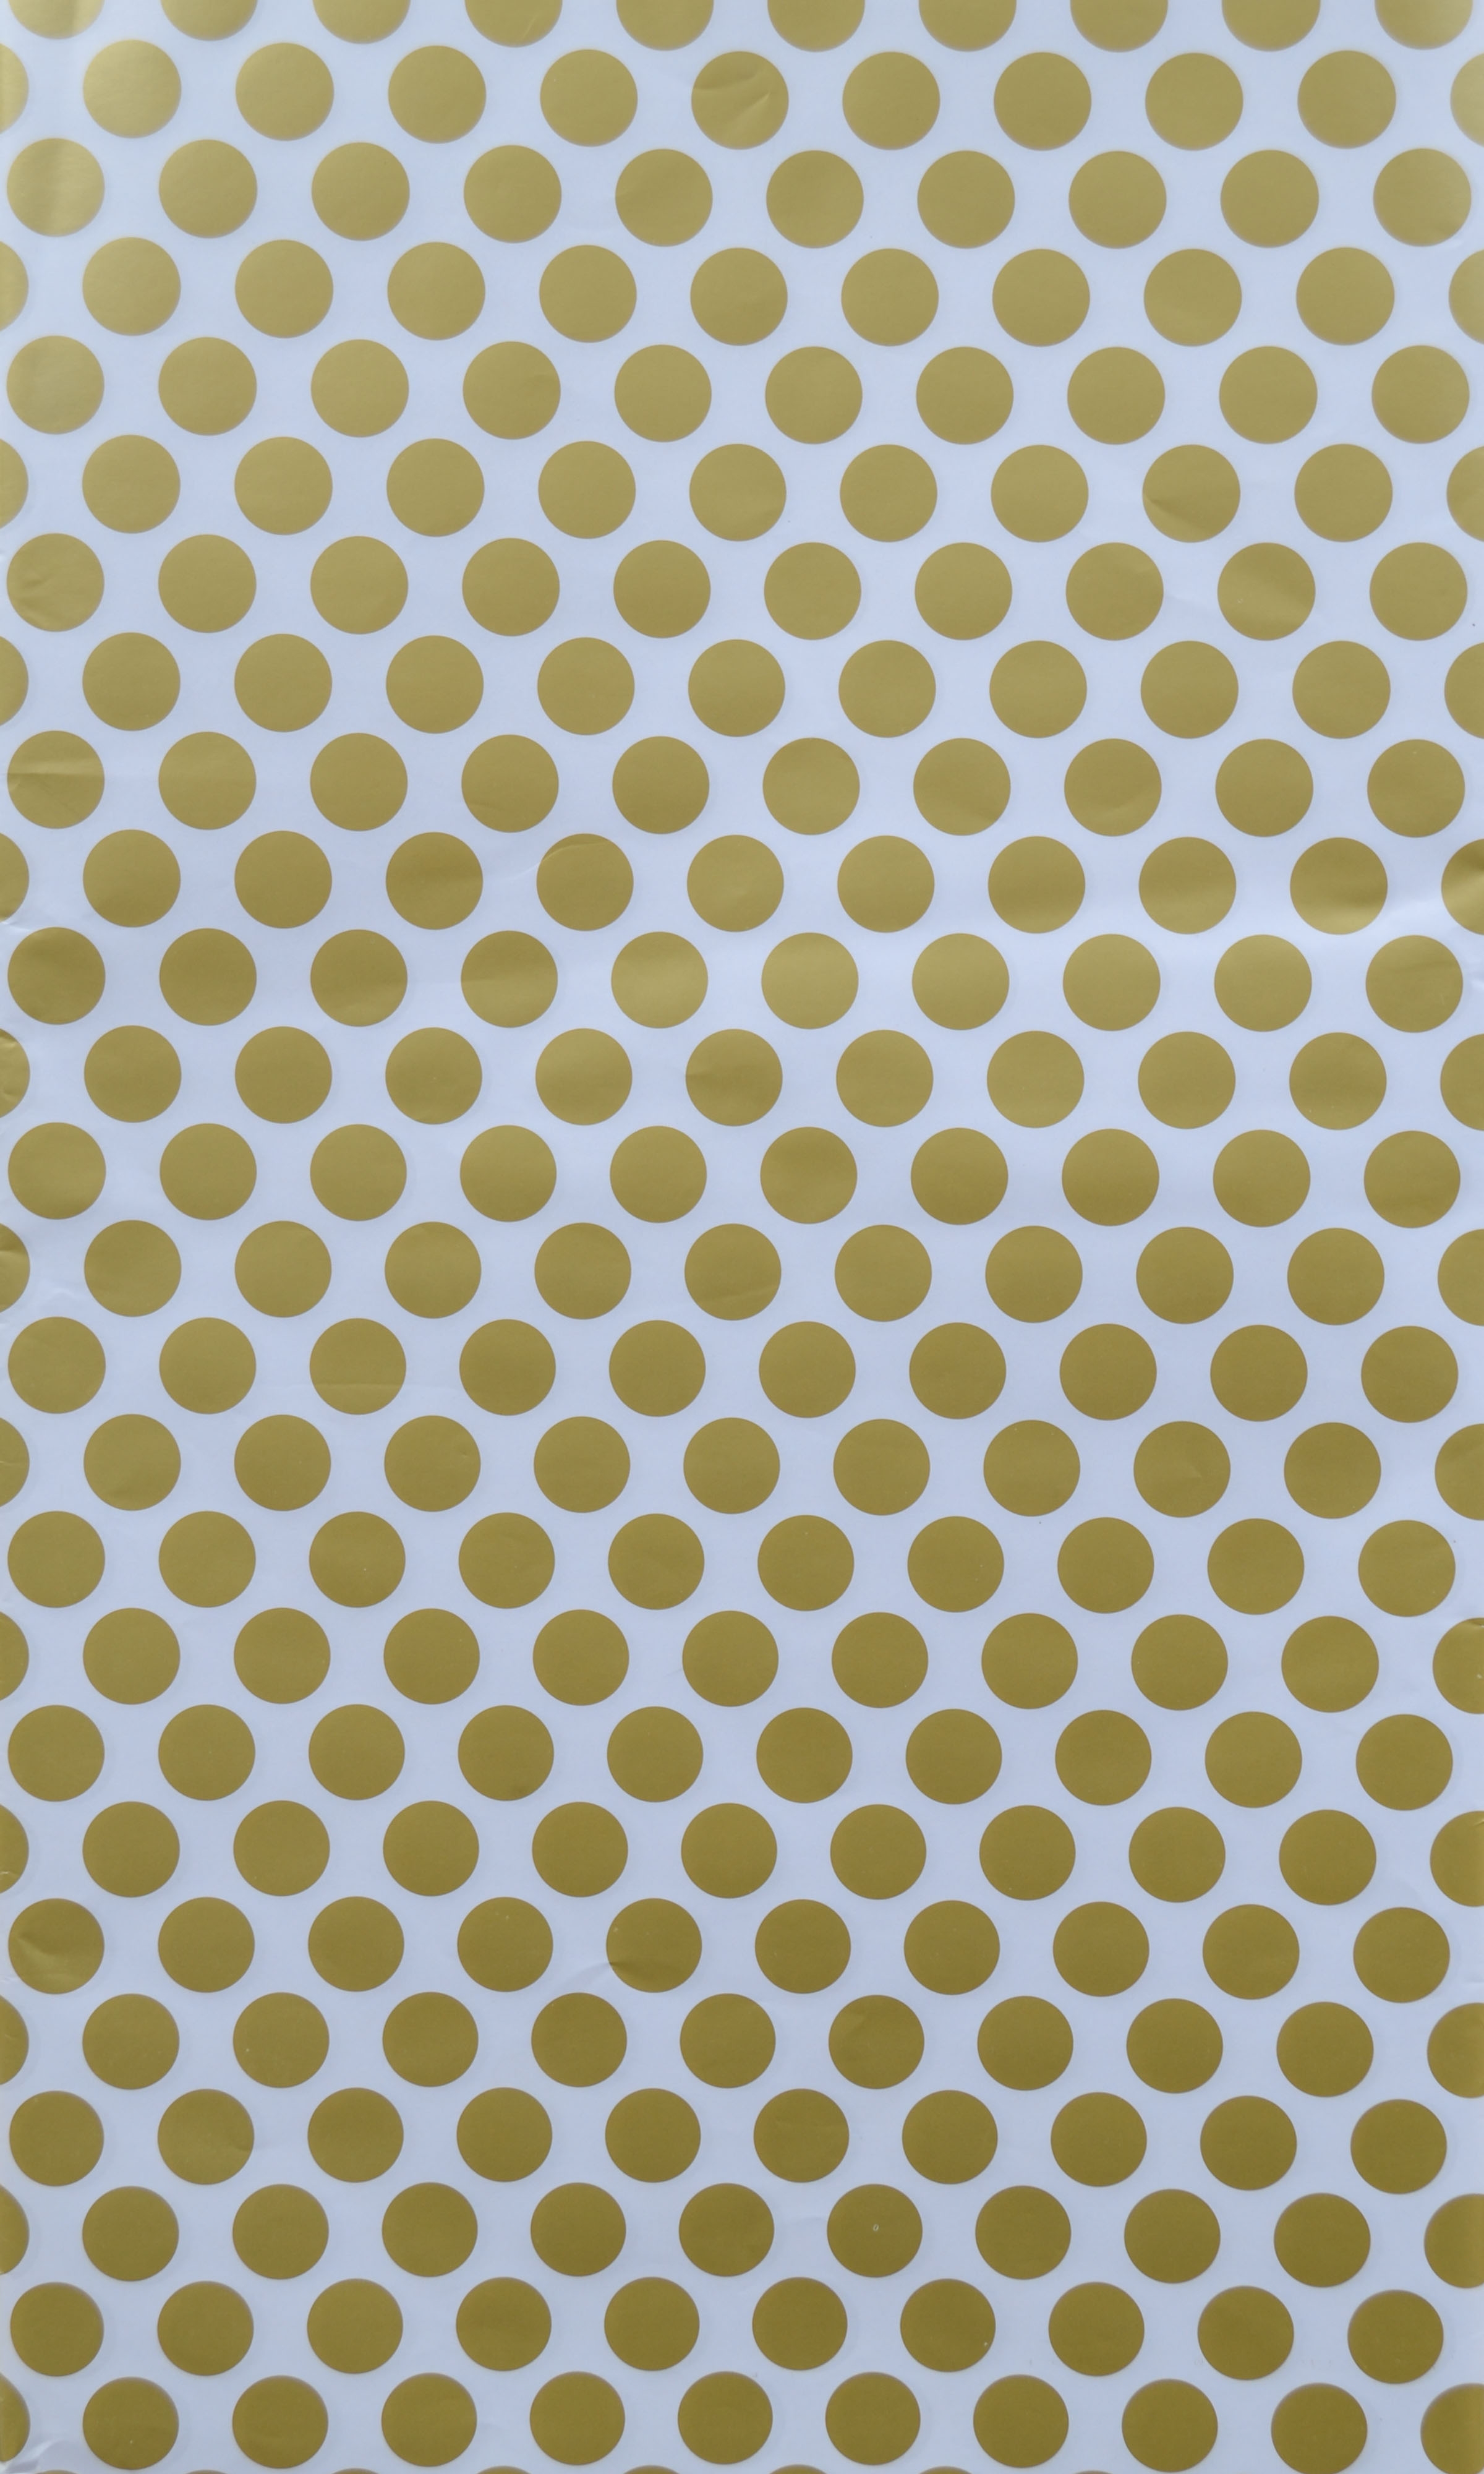 Babeez | Gift wrapping Paper (Polka Dots Design in Gold) undefined